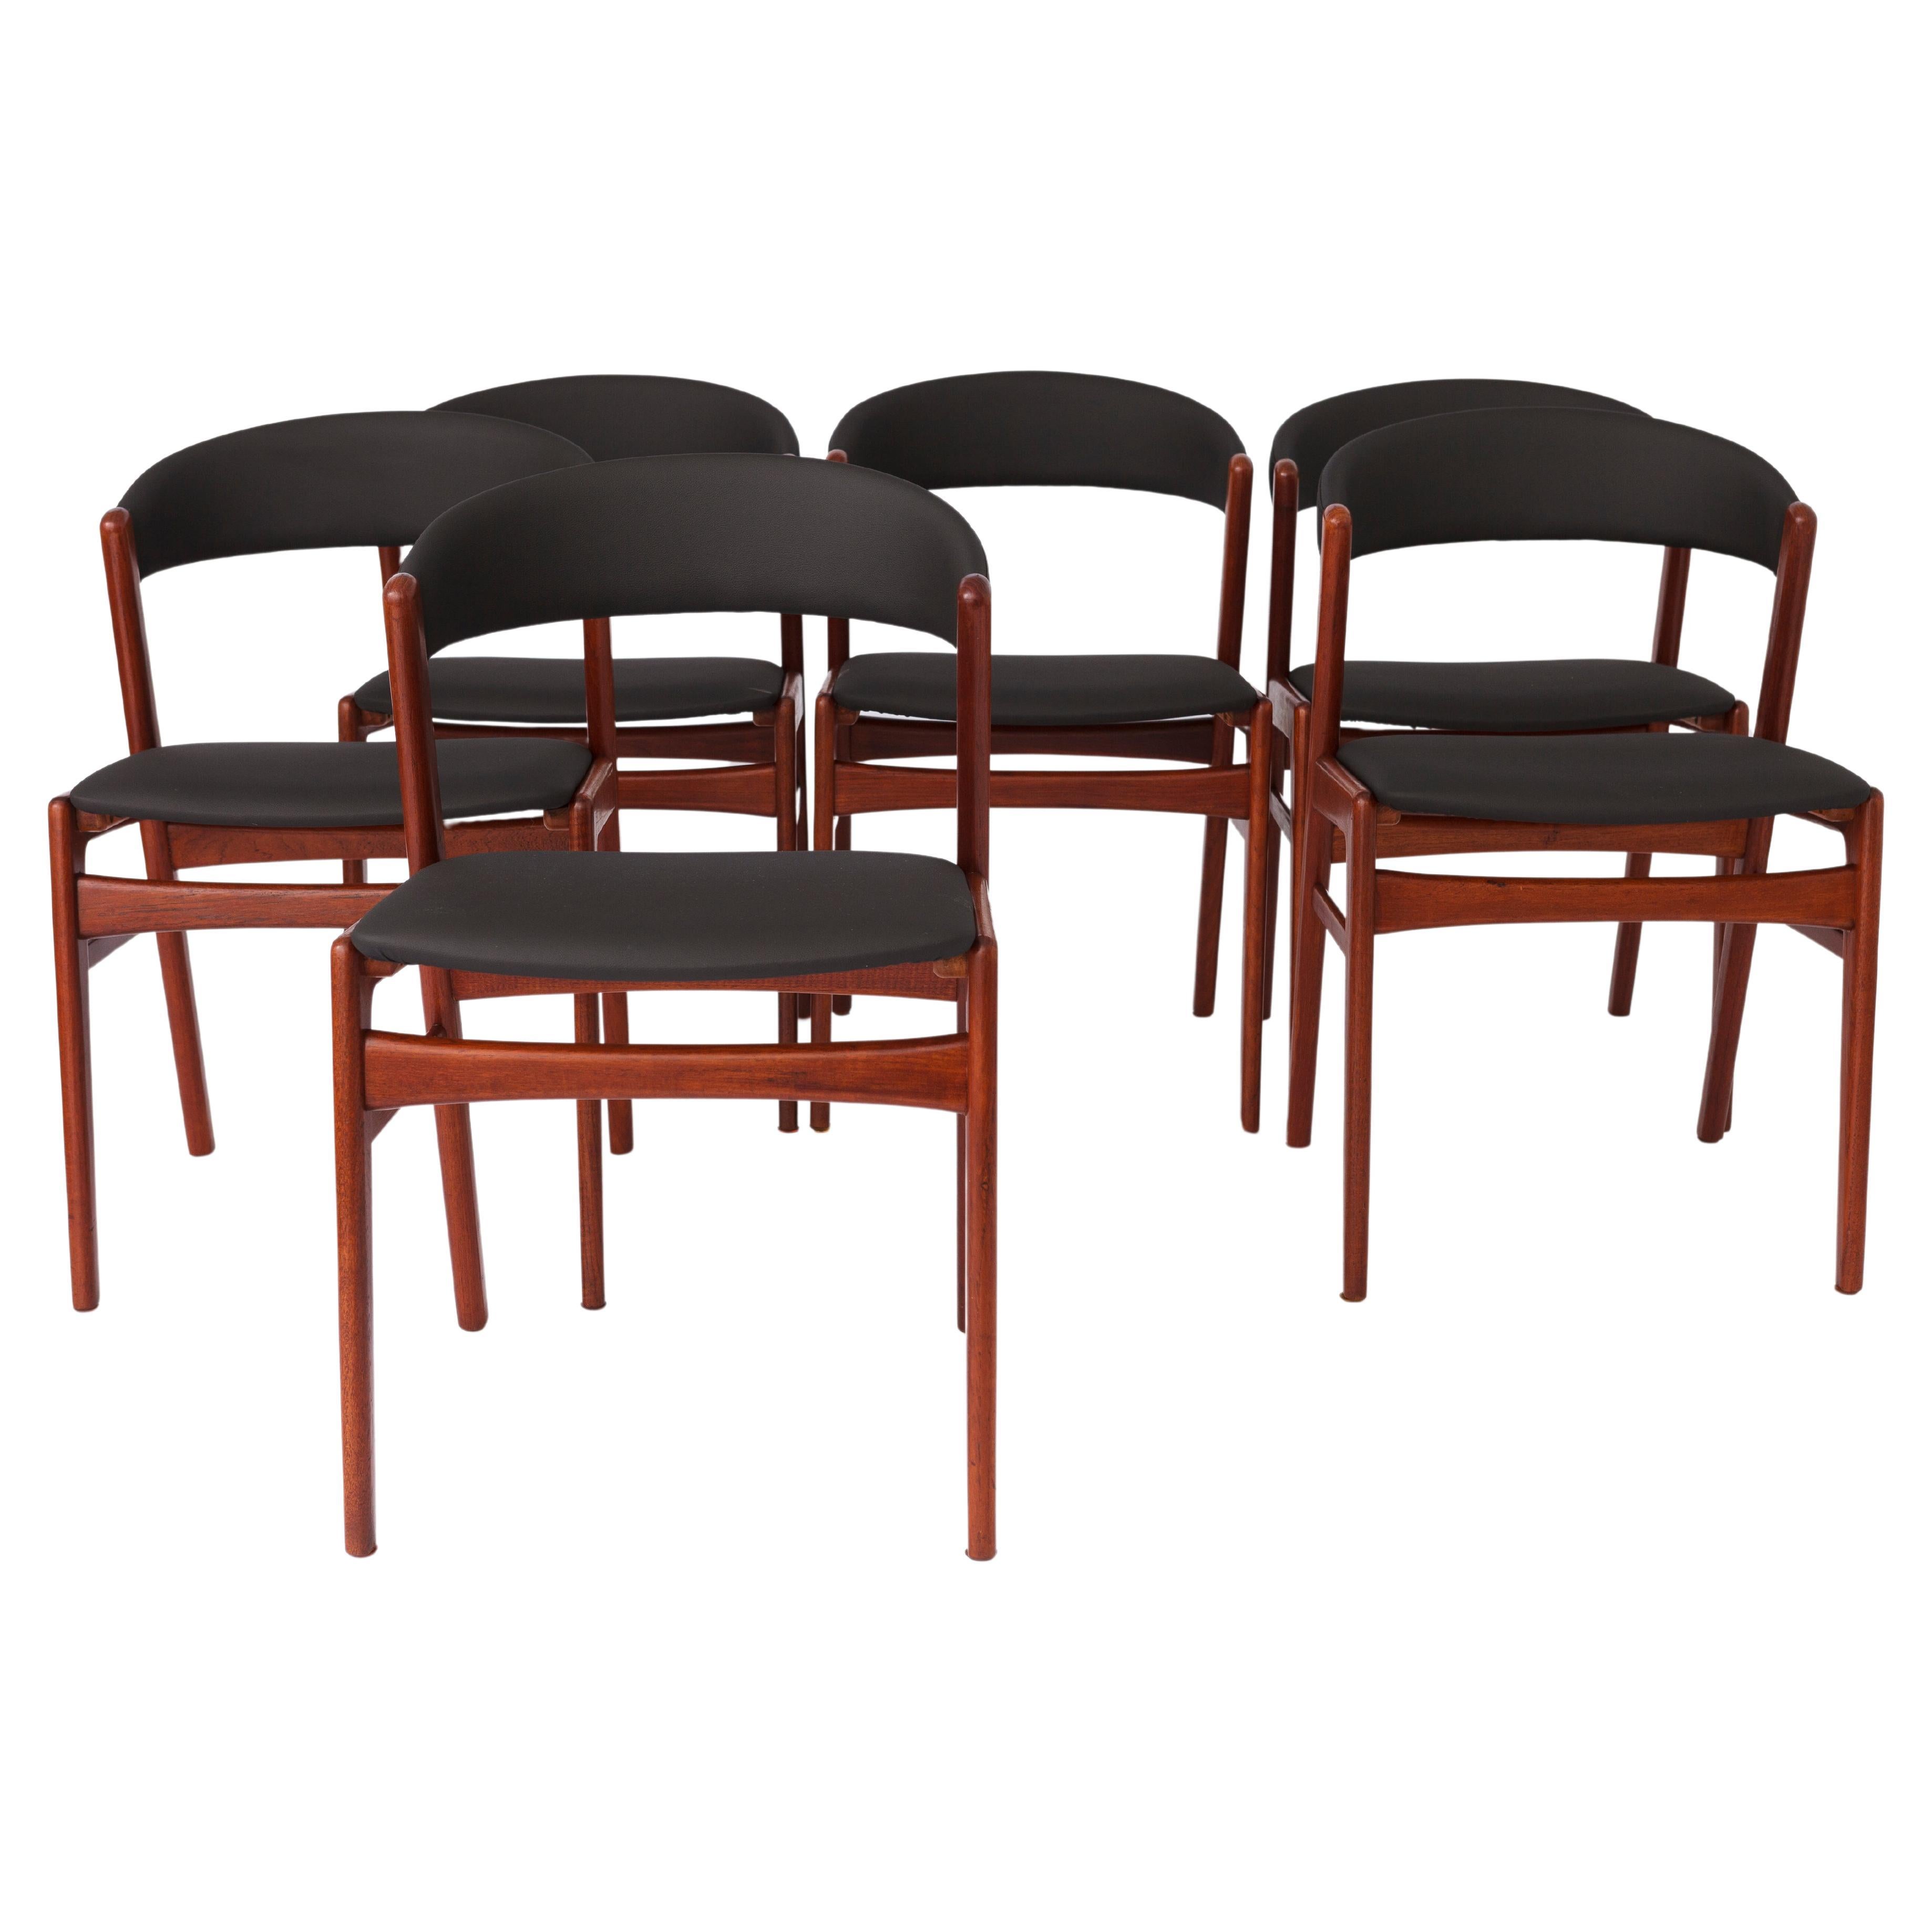 6 Vintage Chairs DUX - Ribbon Back 1960s, Sweden - Dining chairs, Teak, Set of 6